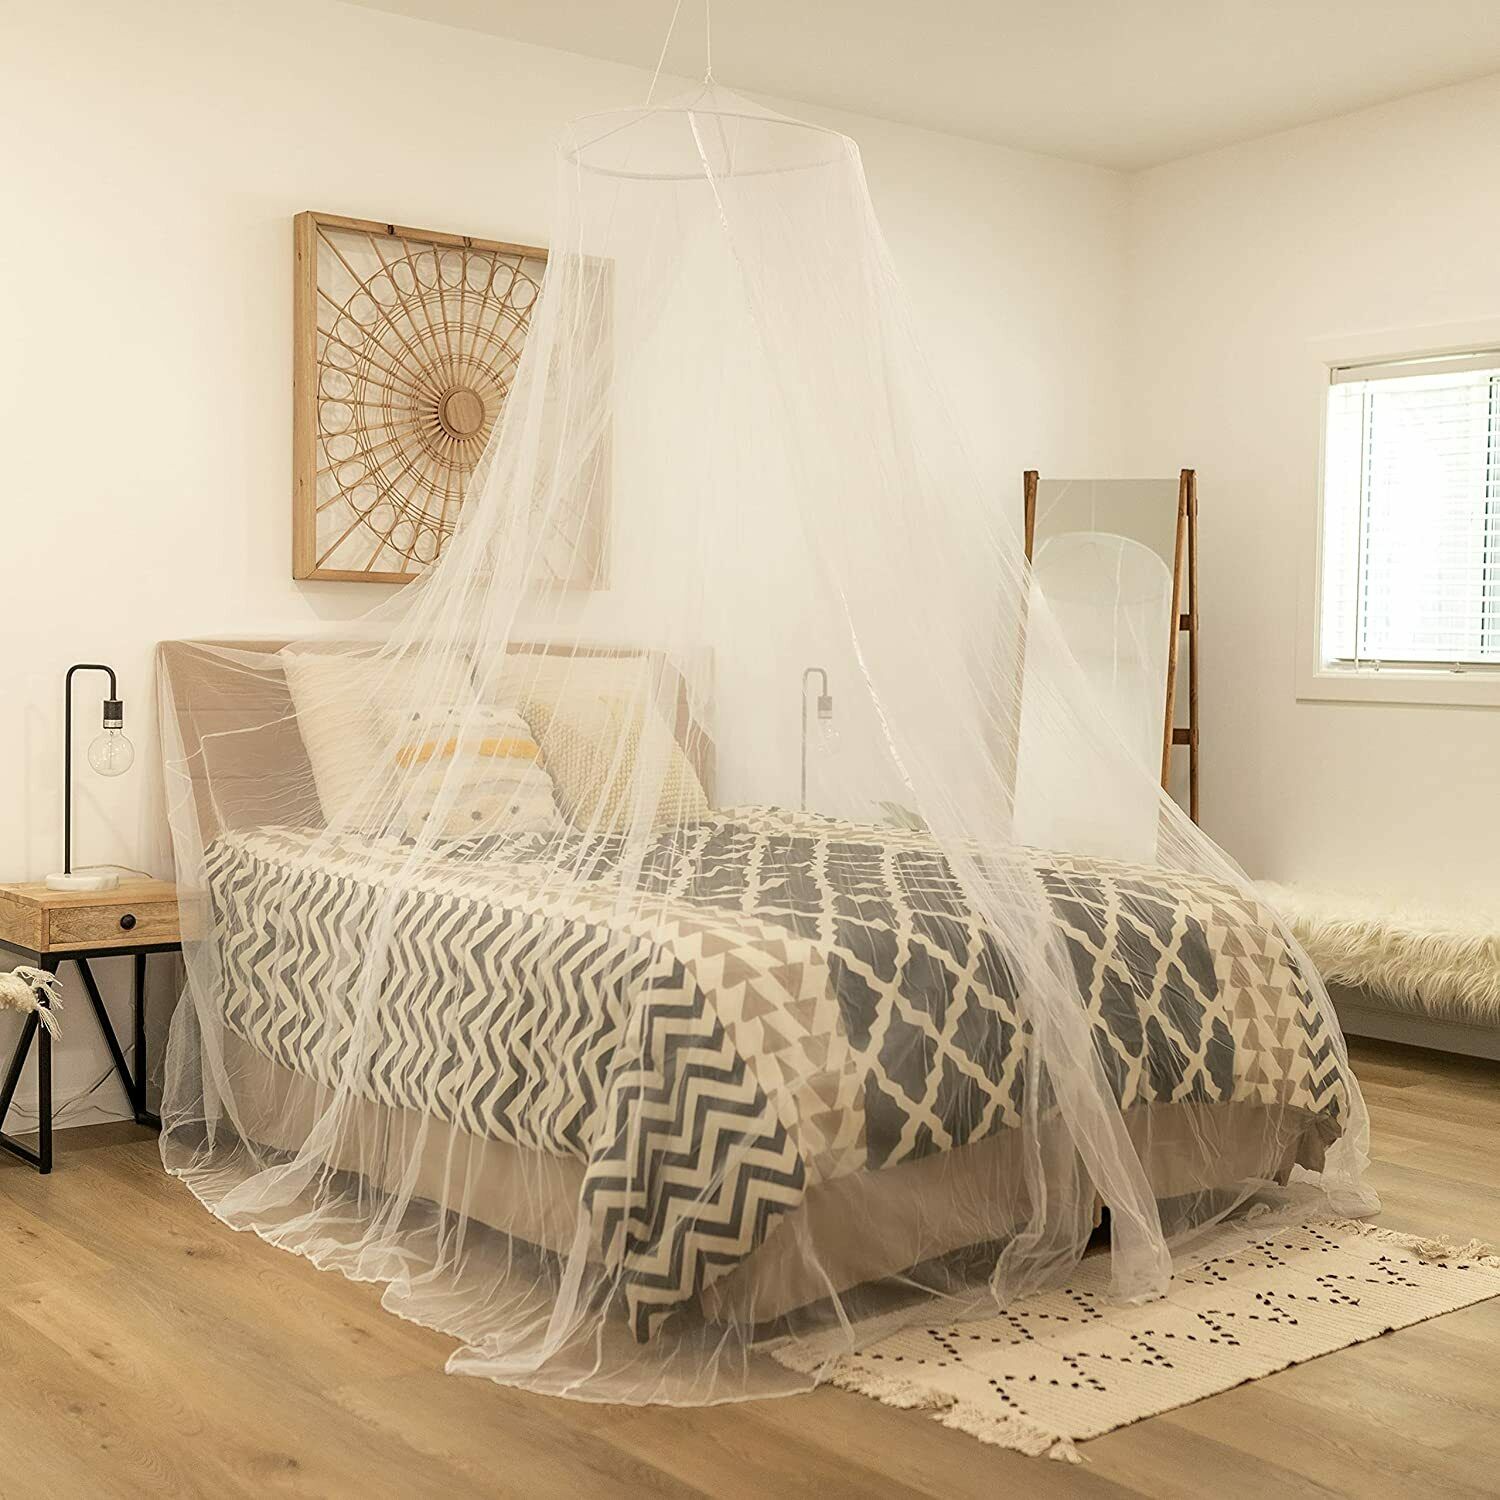 Bed Mosquito Netting Mesh Elegant Lace Canopy Princess Round Dome Bedding Net Us